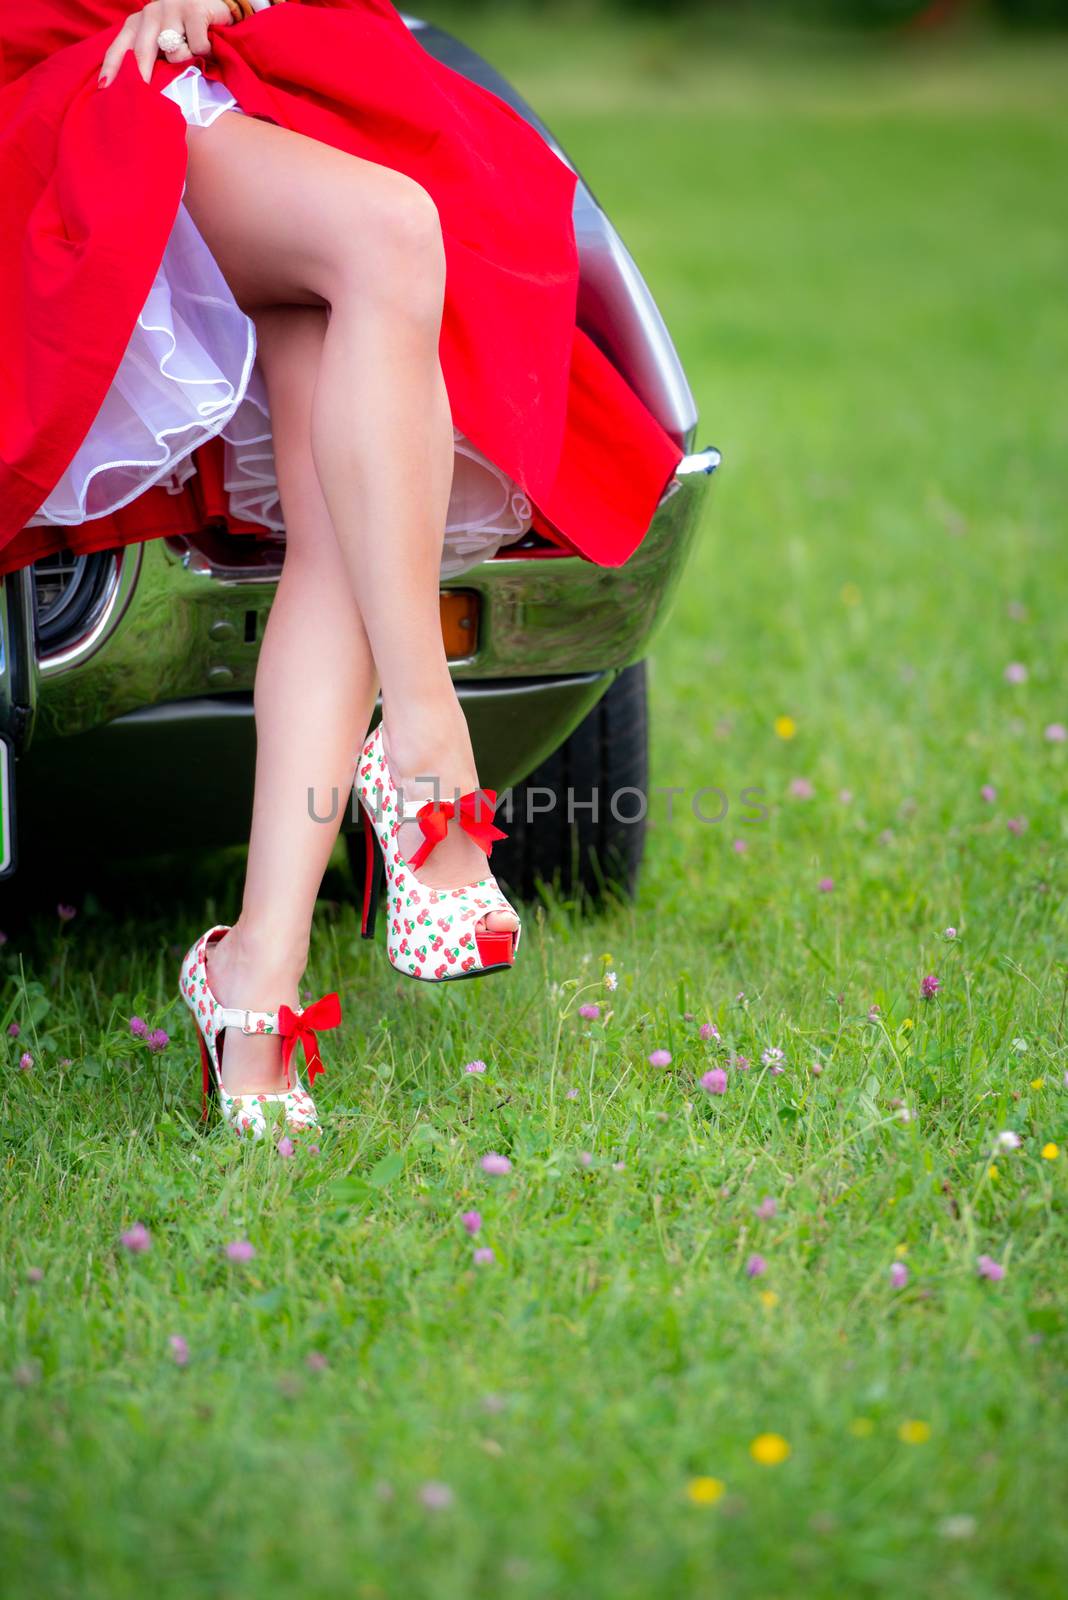 Pin Up Girl Style Long Legs in Red Heels by asafaric